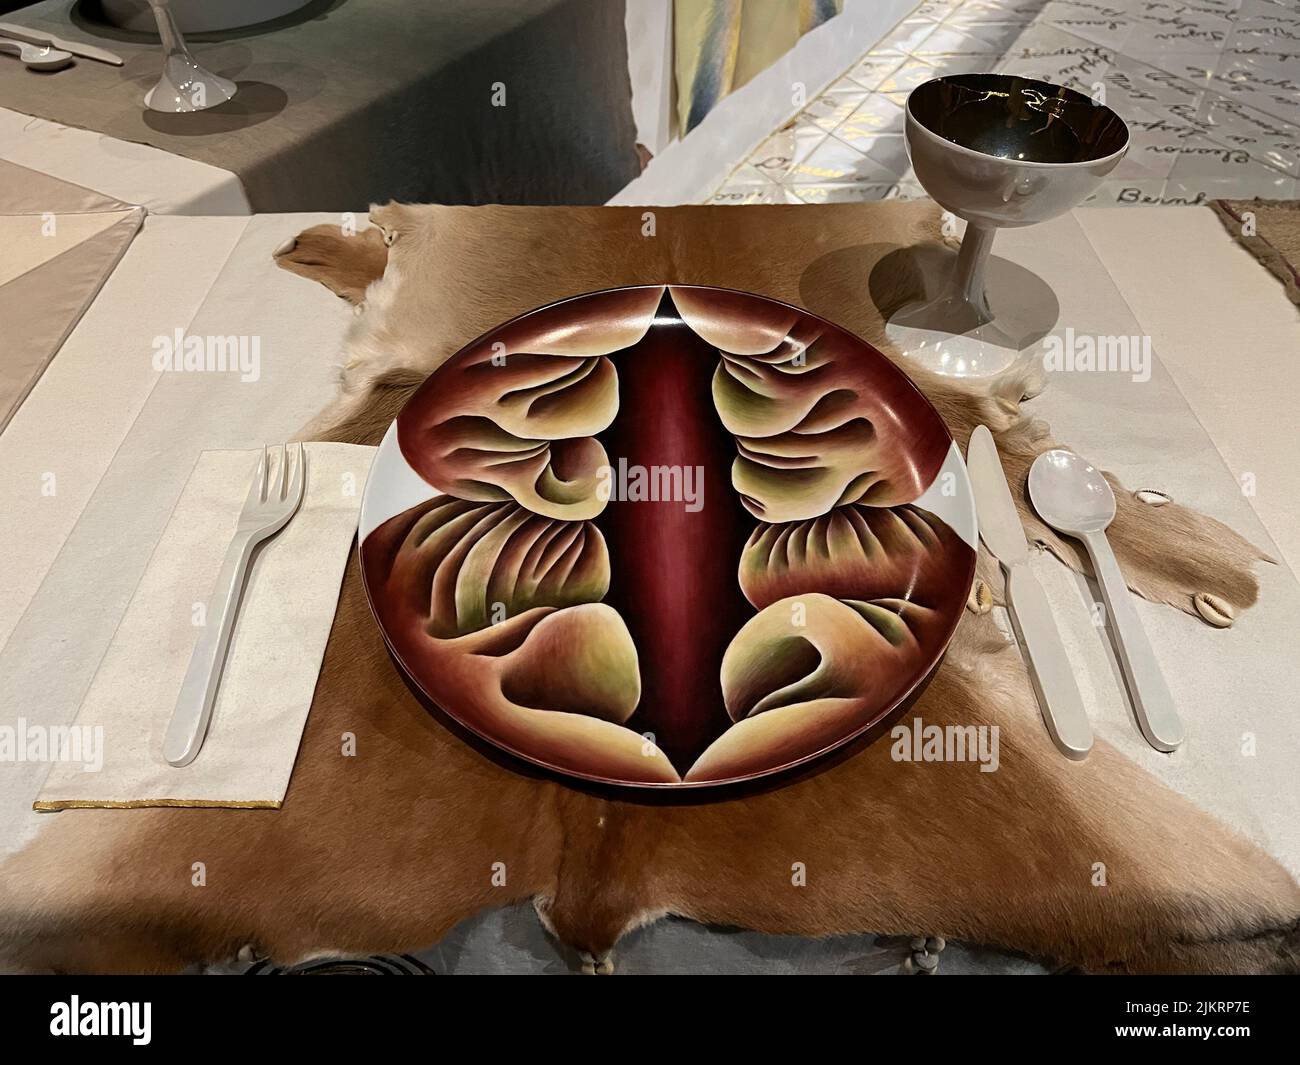 Judy Chicago, 'The Dinner Party,' Brooklyn Museum, 'Primordial Goddess' plate and setting. Stock Photo